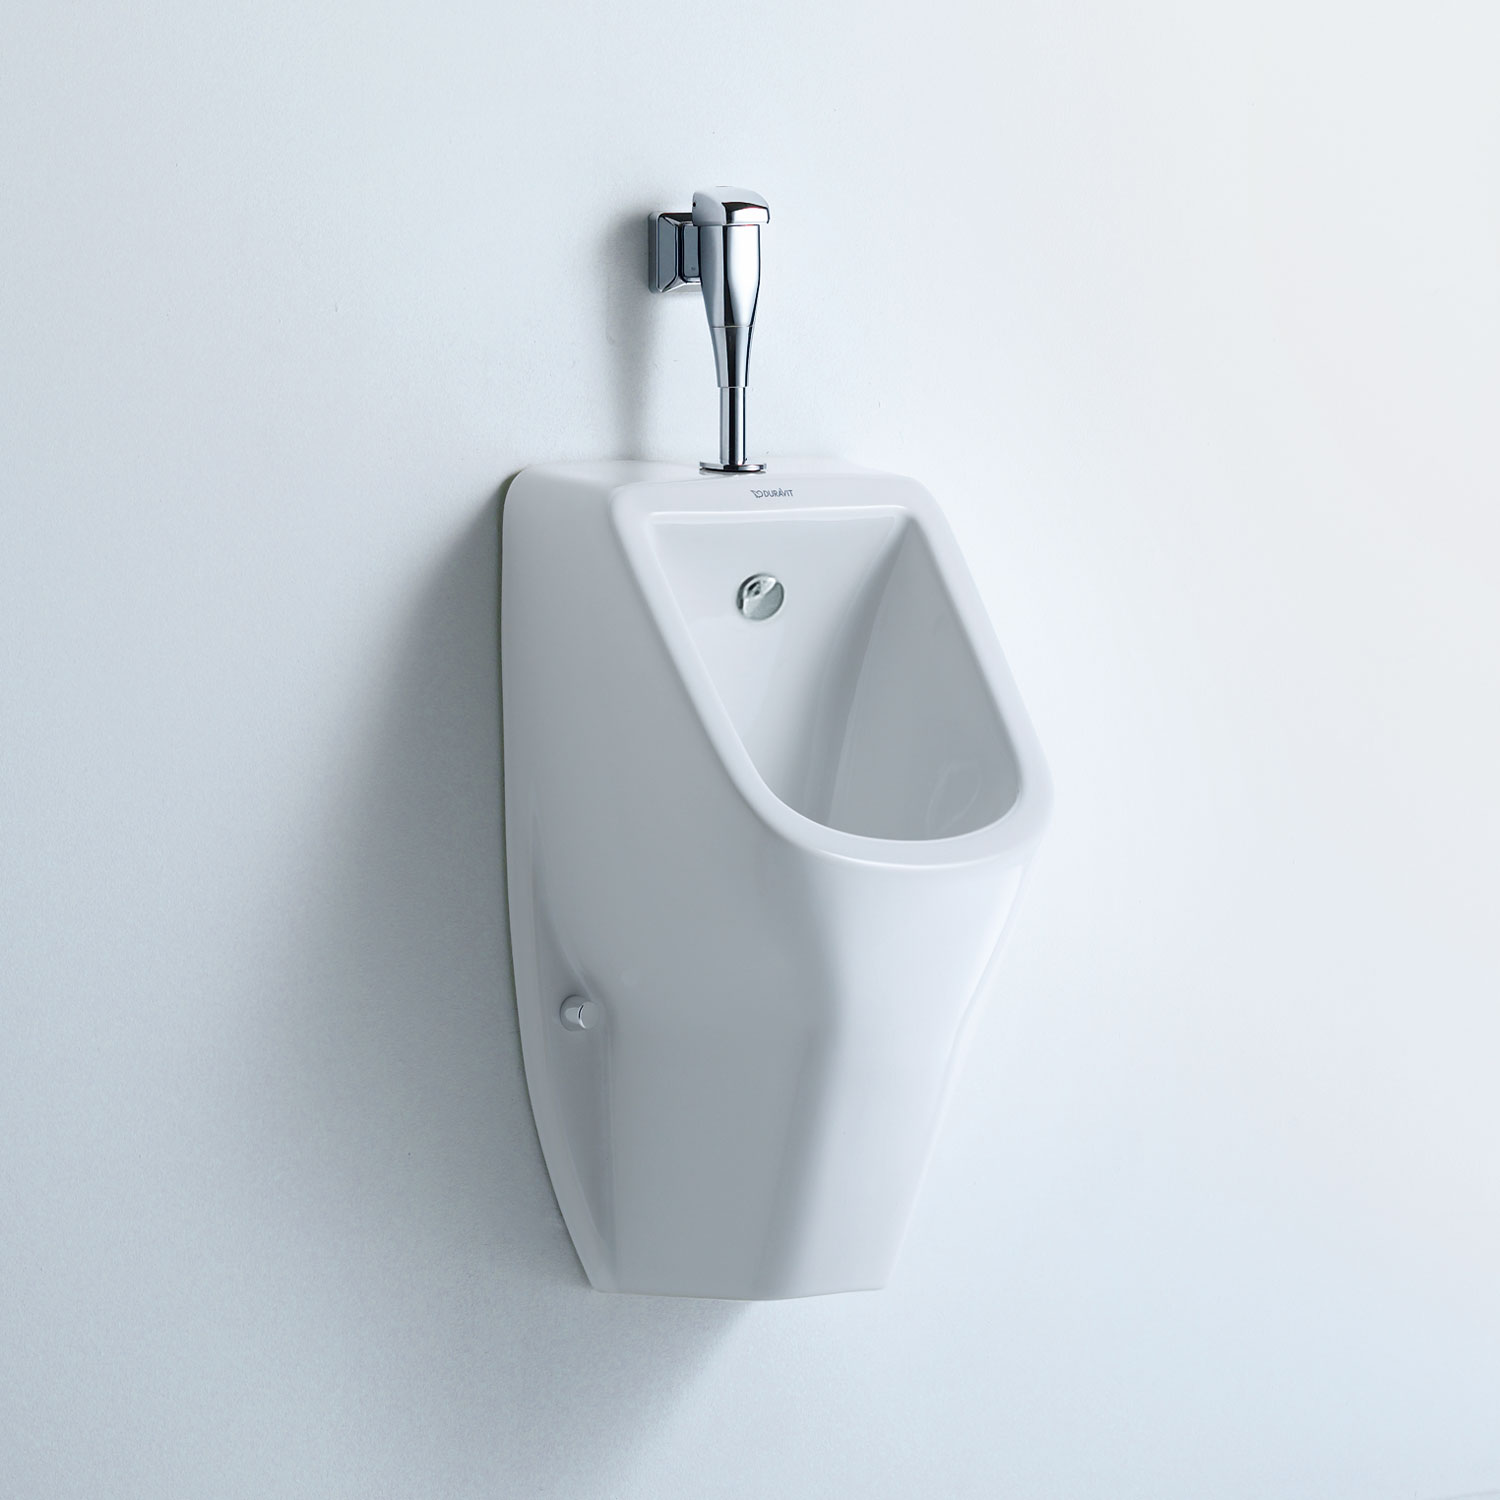 D-code urinal on white wall
